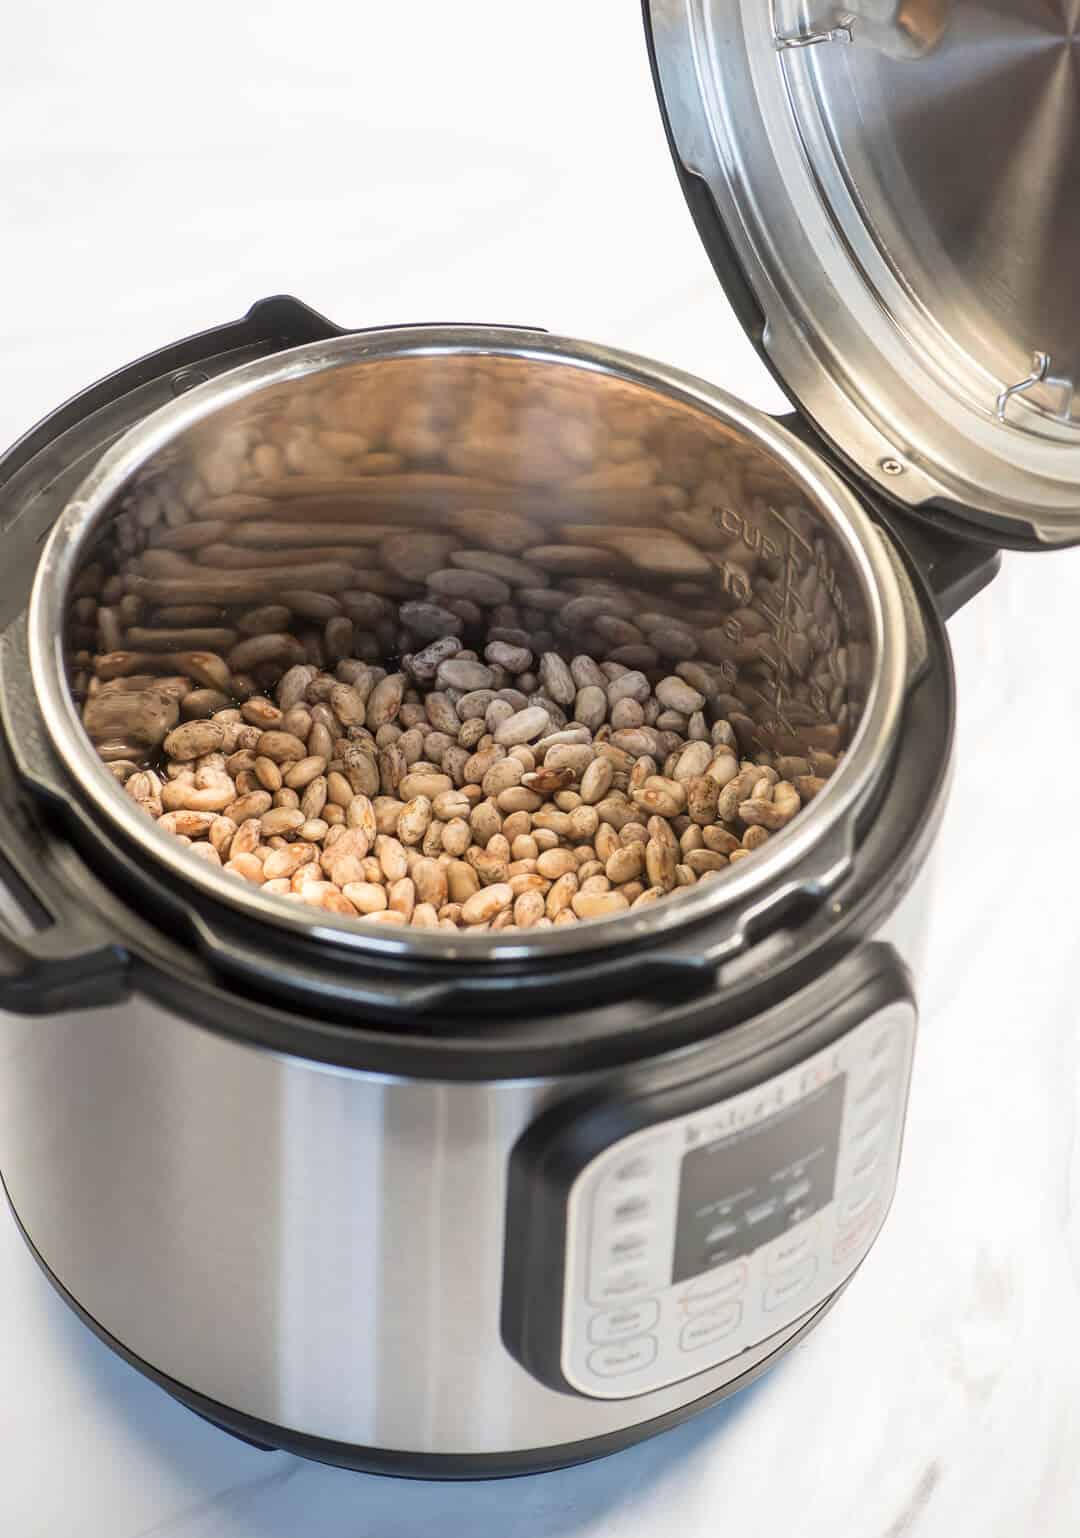 An image showing the lid resting on one of the handles of the Instant Pot revealing a pot full of dry beans.